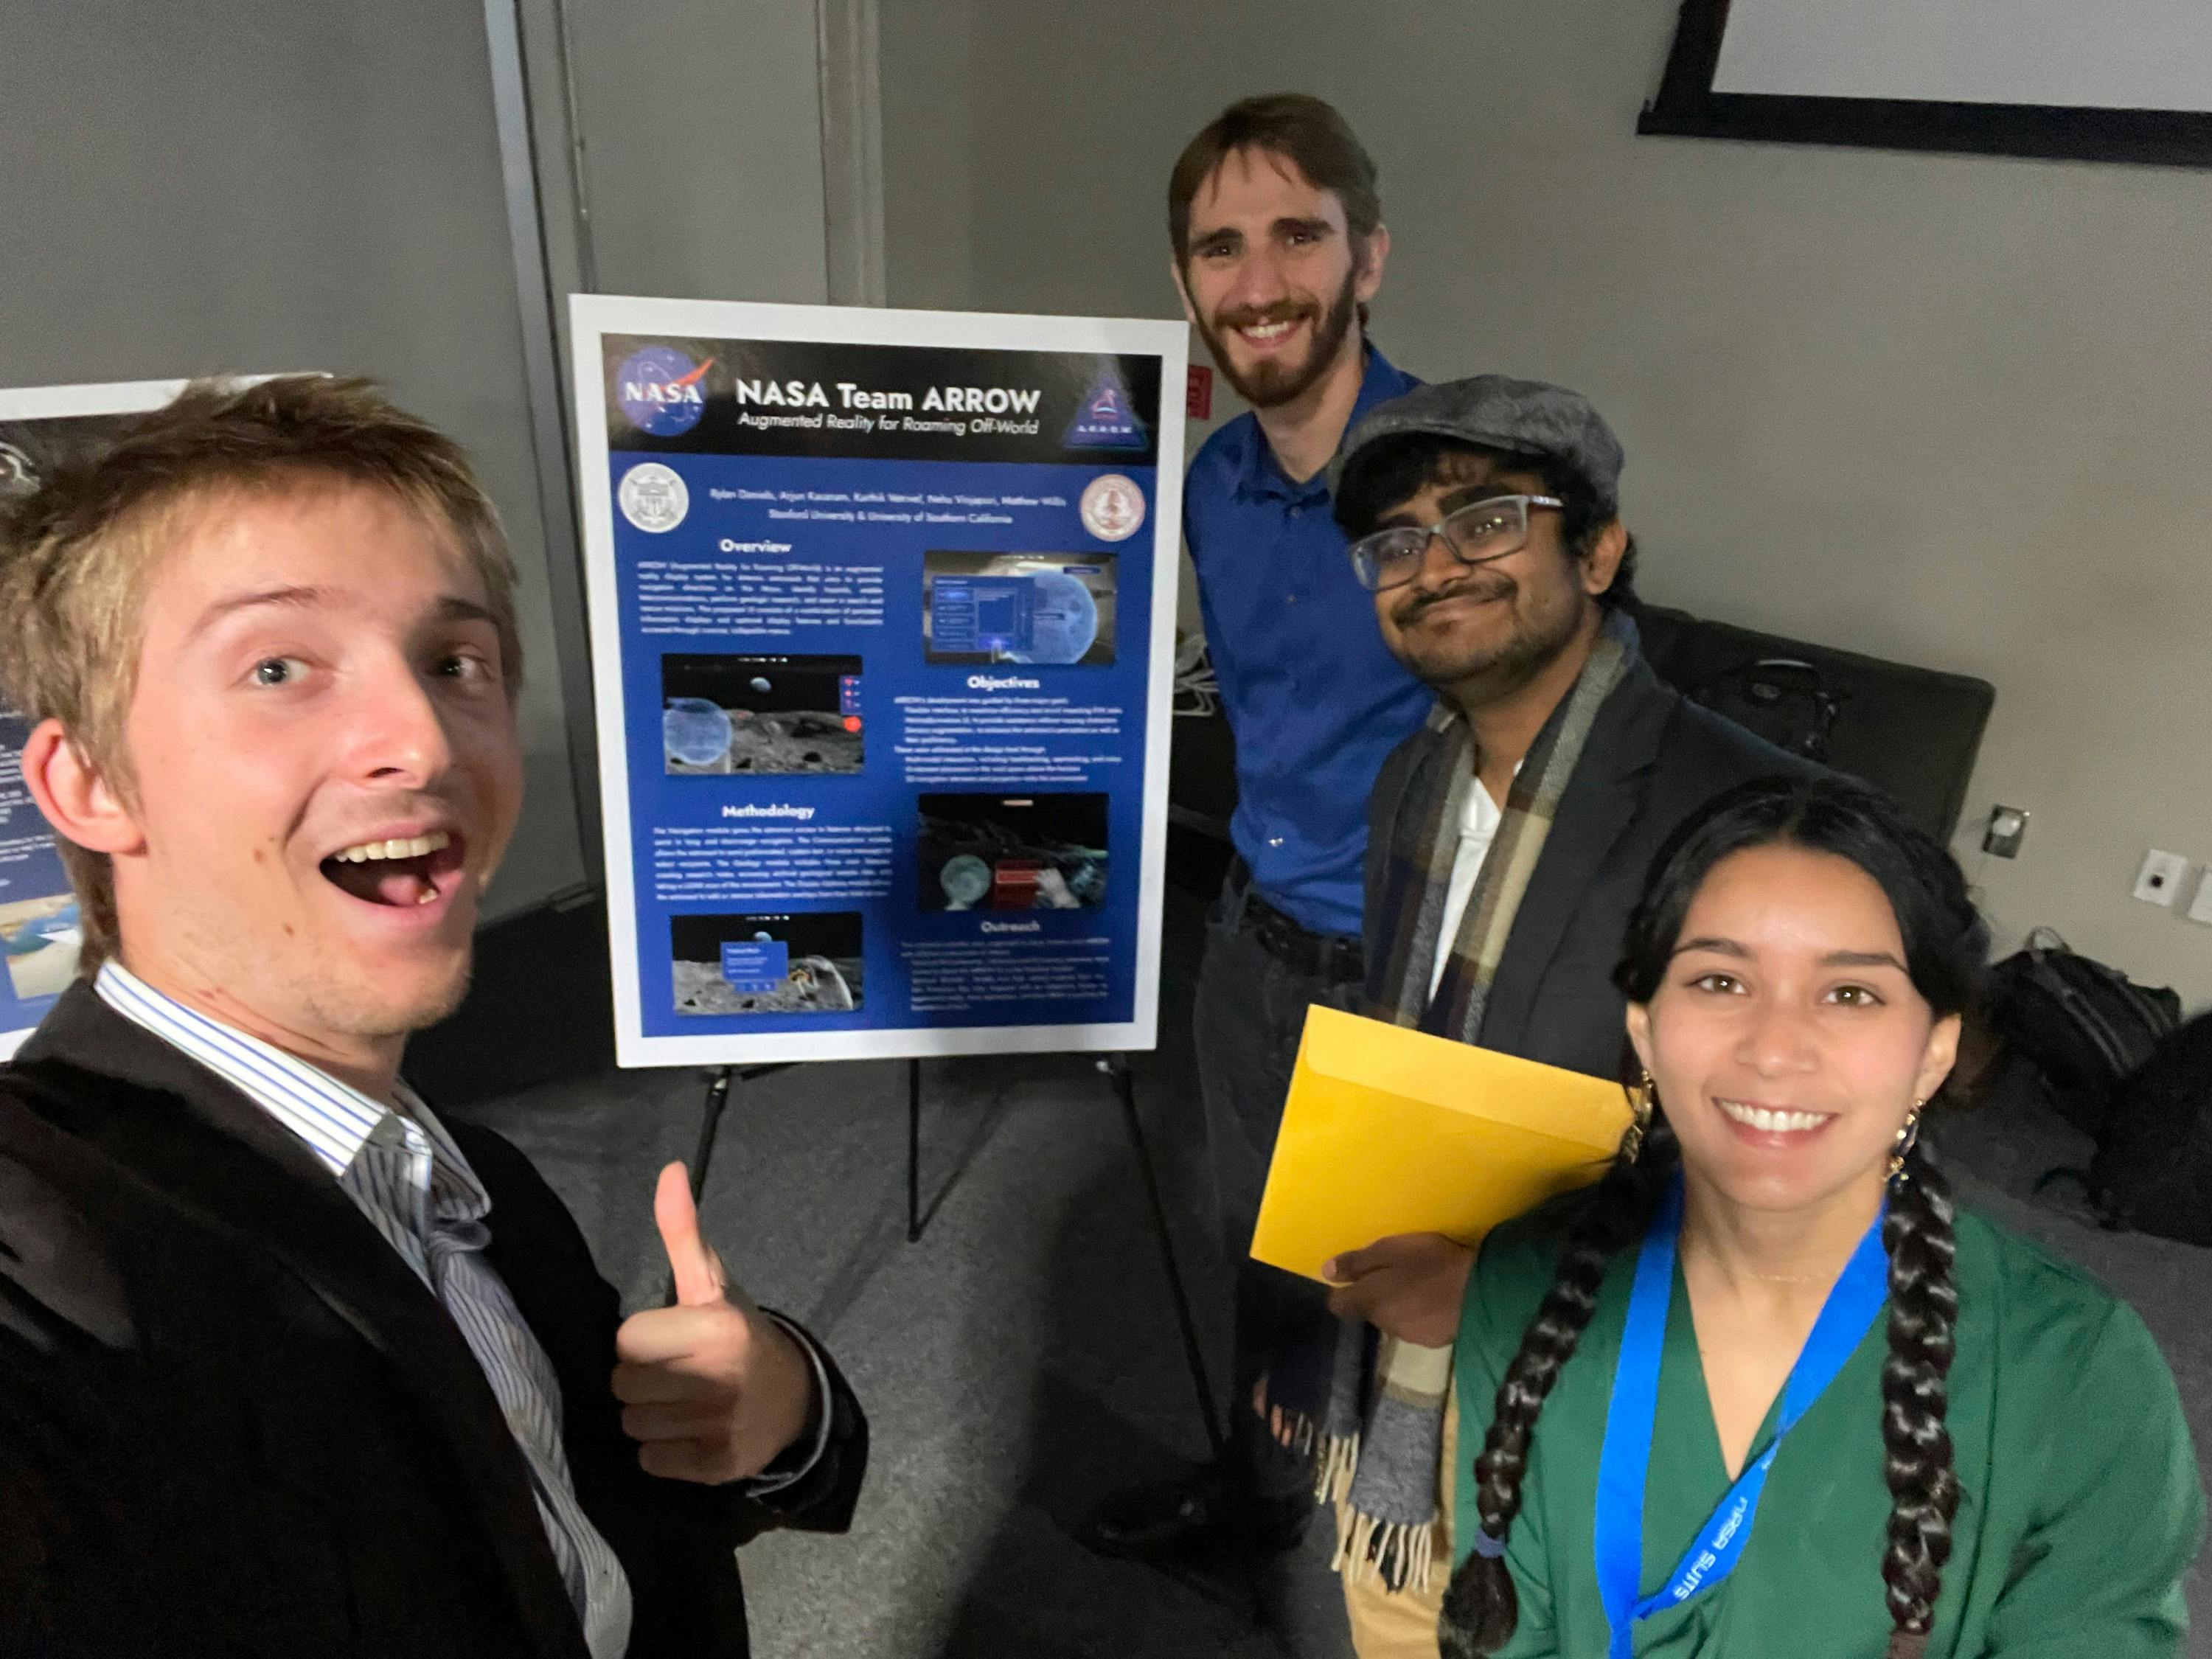 Selfie of a group of four young people smiling near a poster that reads "NASA Team ARROW"